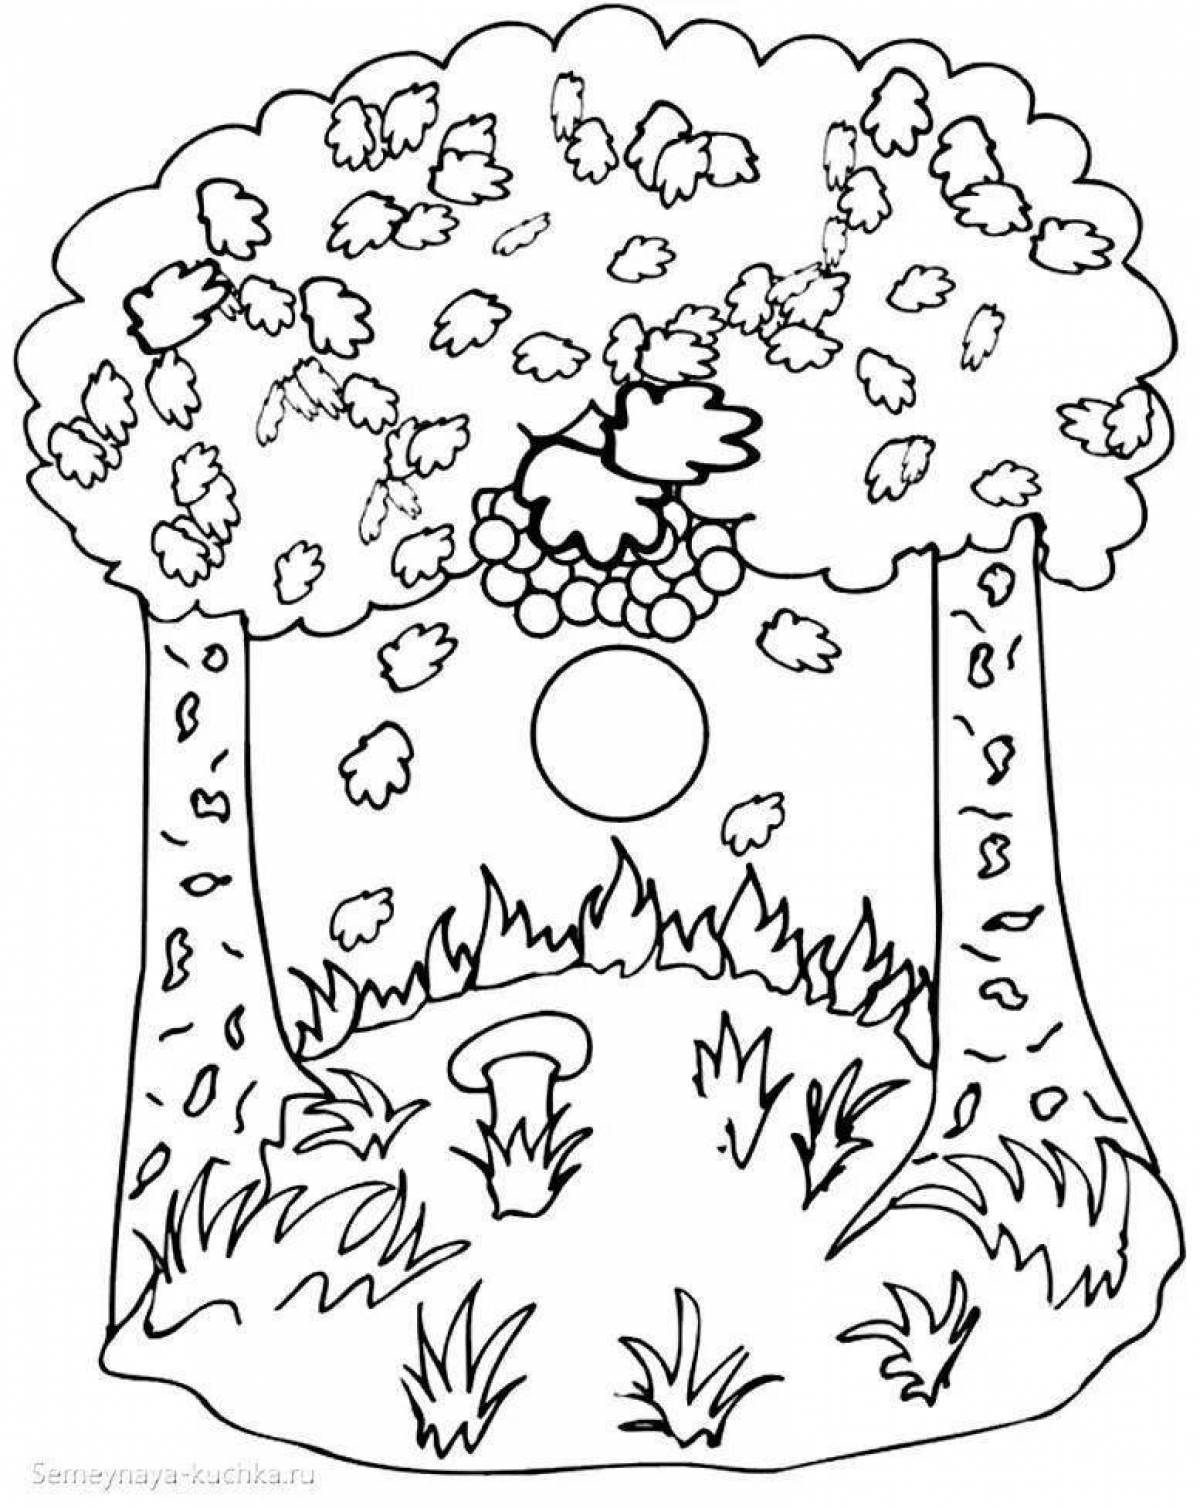 Coloring page charming autumn forest